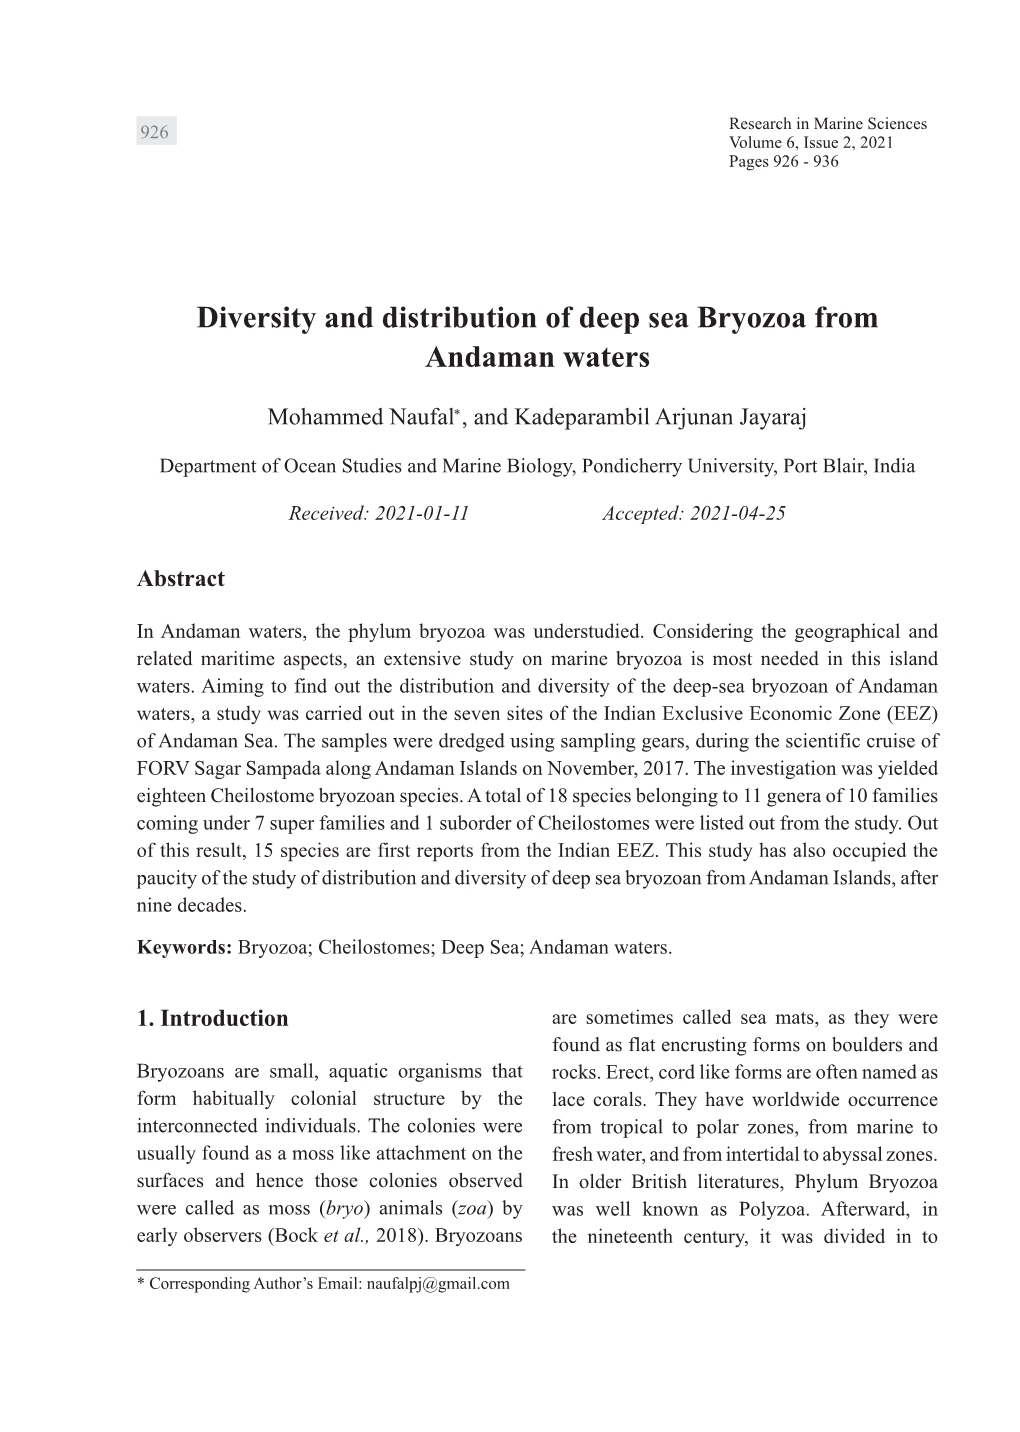 Diversity and Distribution of Deep Sea Bryozoa from Andaman Waters